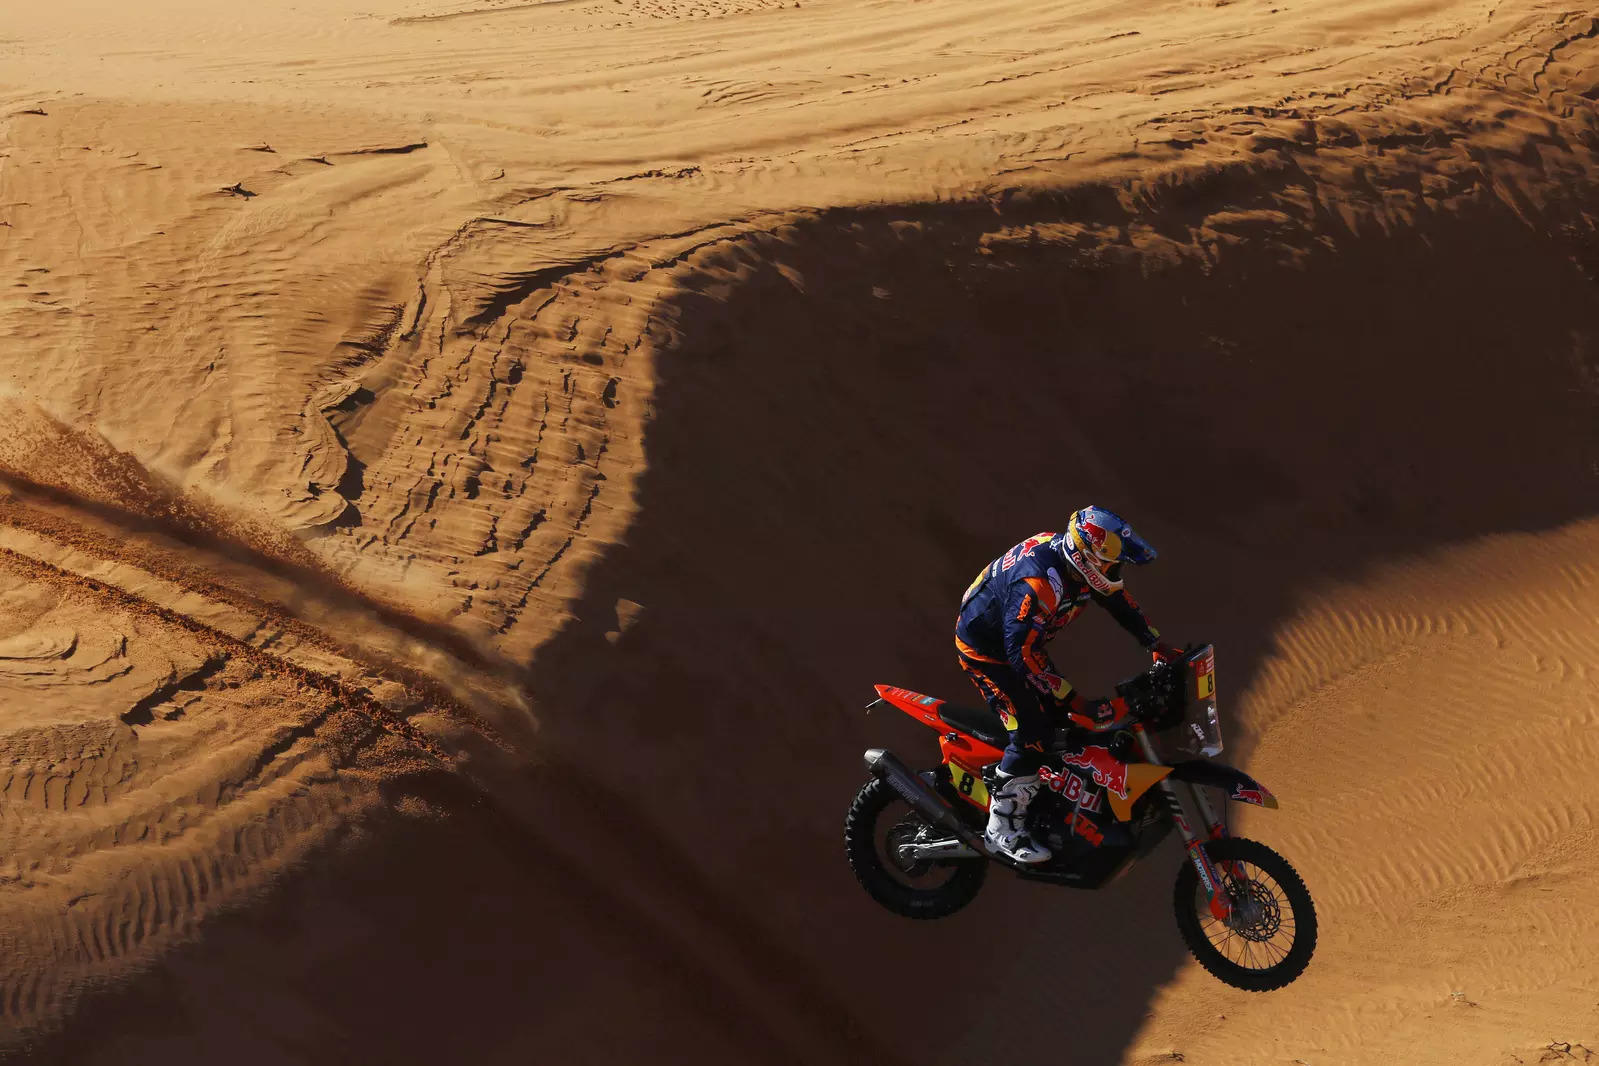 Visuals from the Dakar Rally in Saudi Arabia, one of the most famous off-road races in the world